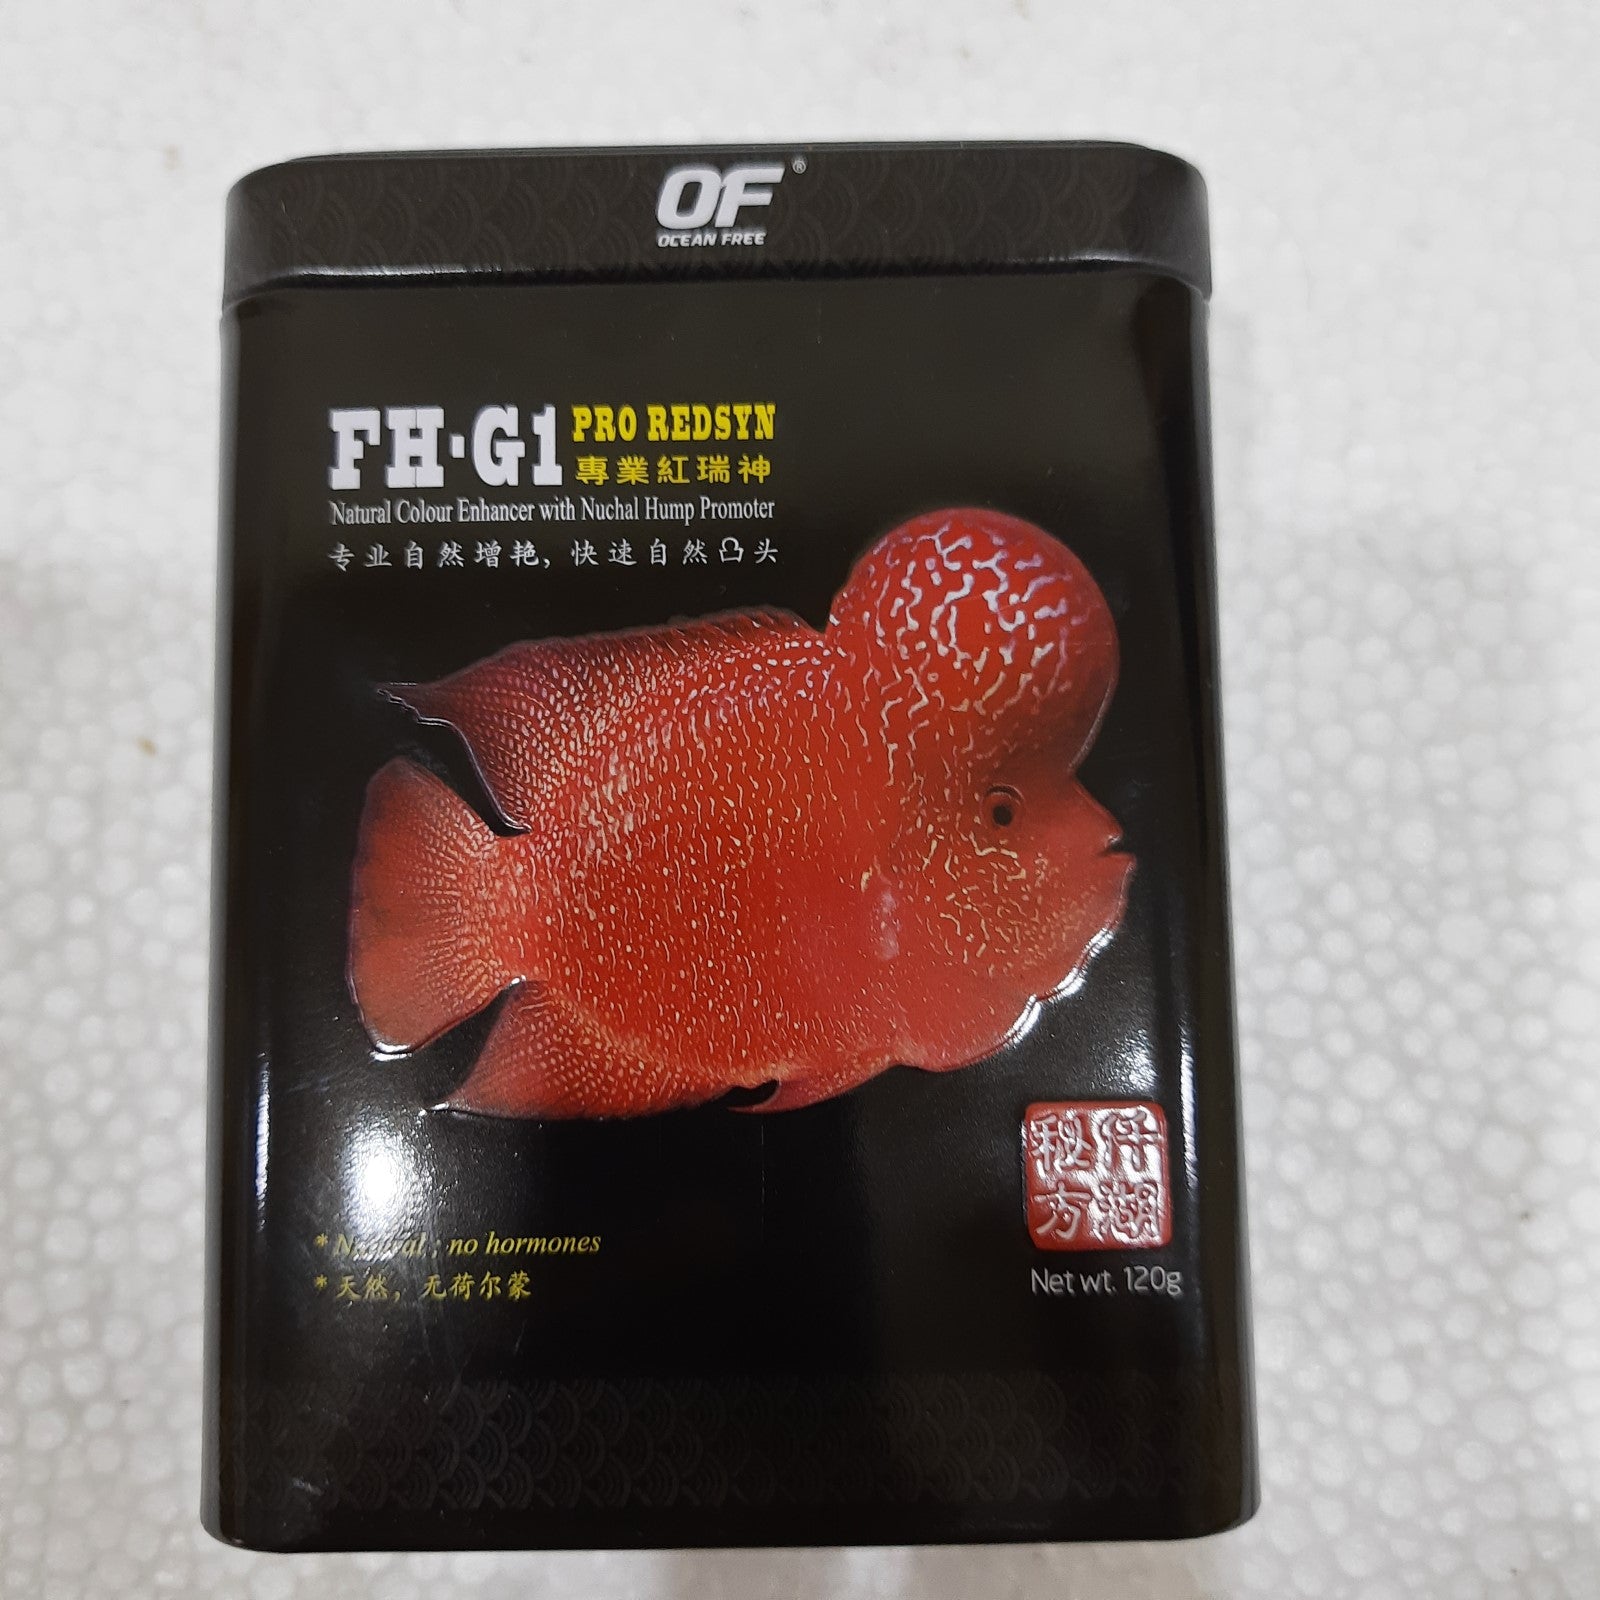 OF* FH-G1 PRO RED SYN 100 g